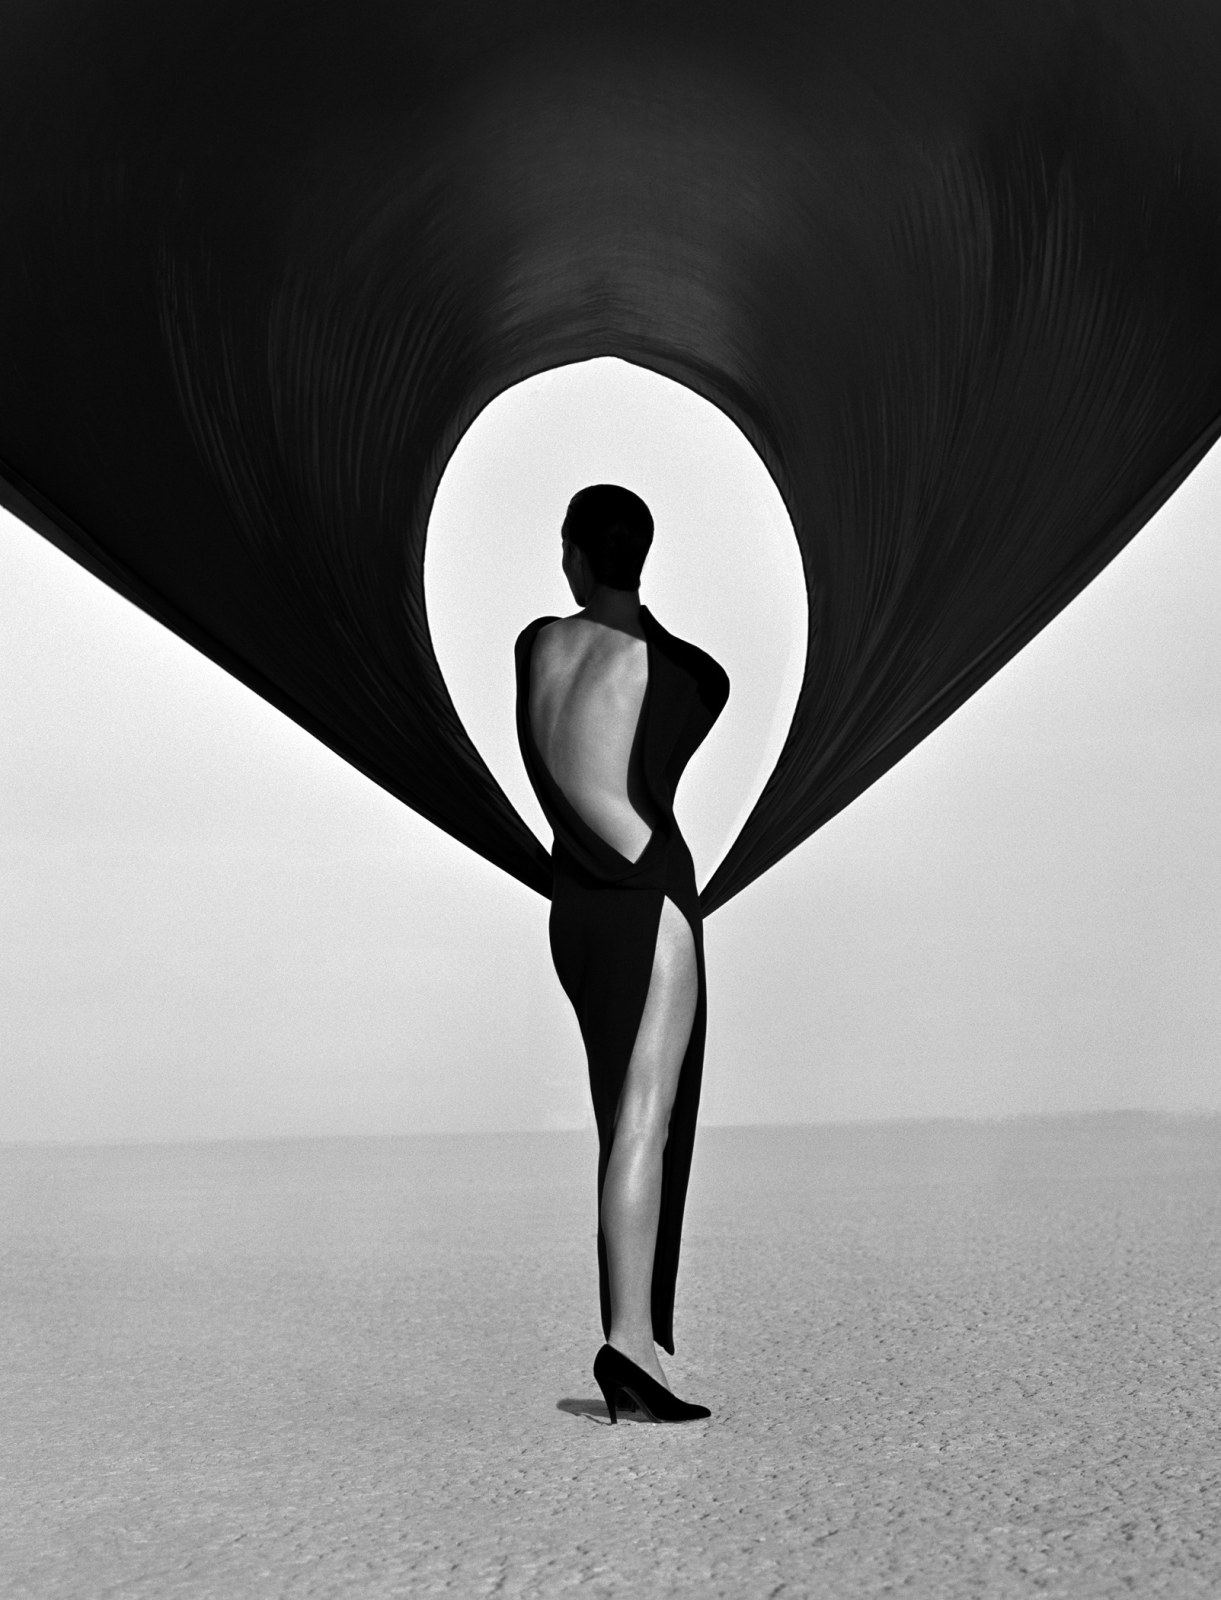 A black and white photo of a figure in a black dress in the desert with black fabric suspended overhead